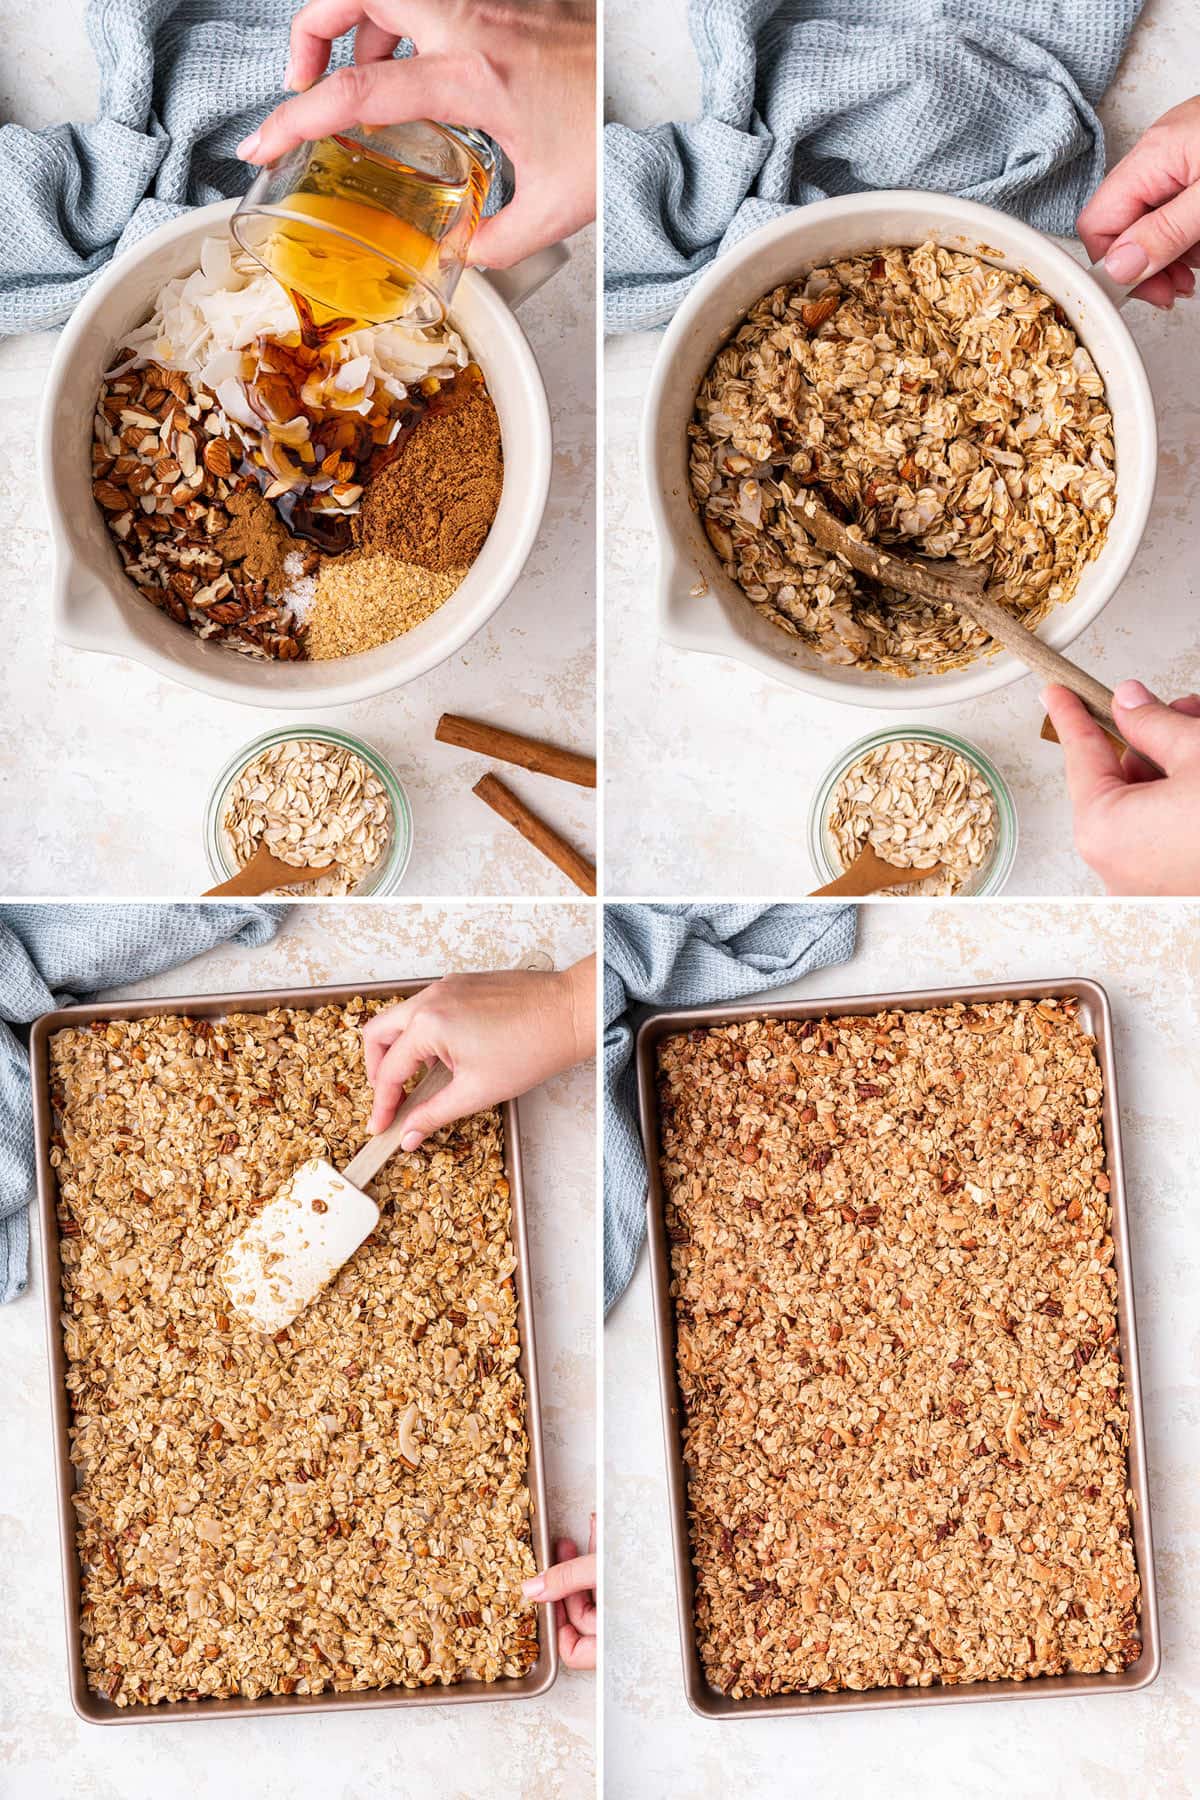 Four photos showing the steps to make Homemade Granola: mixing oats and nuts for the granola, pressing onto a pan and then baking.